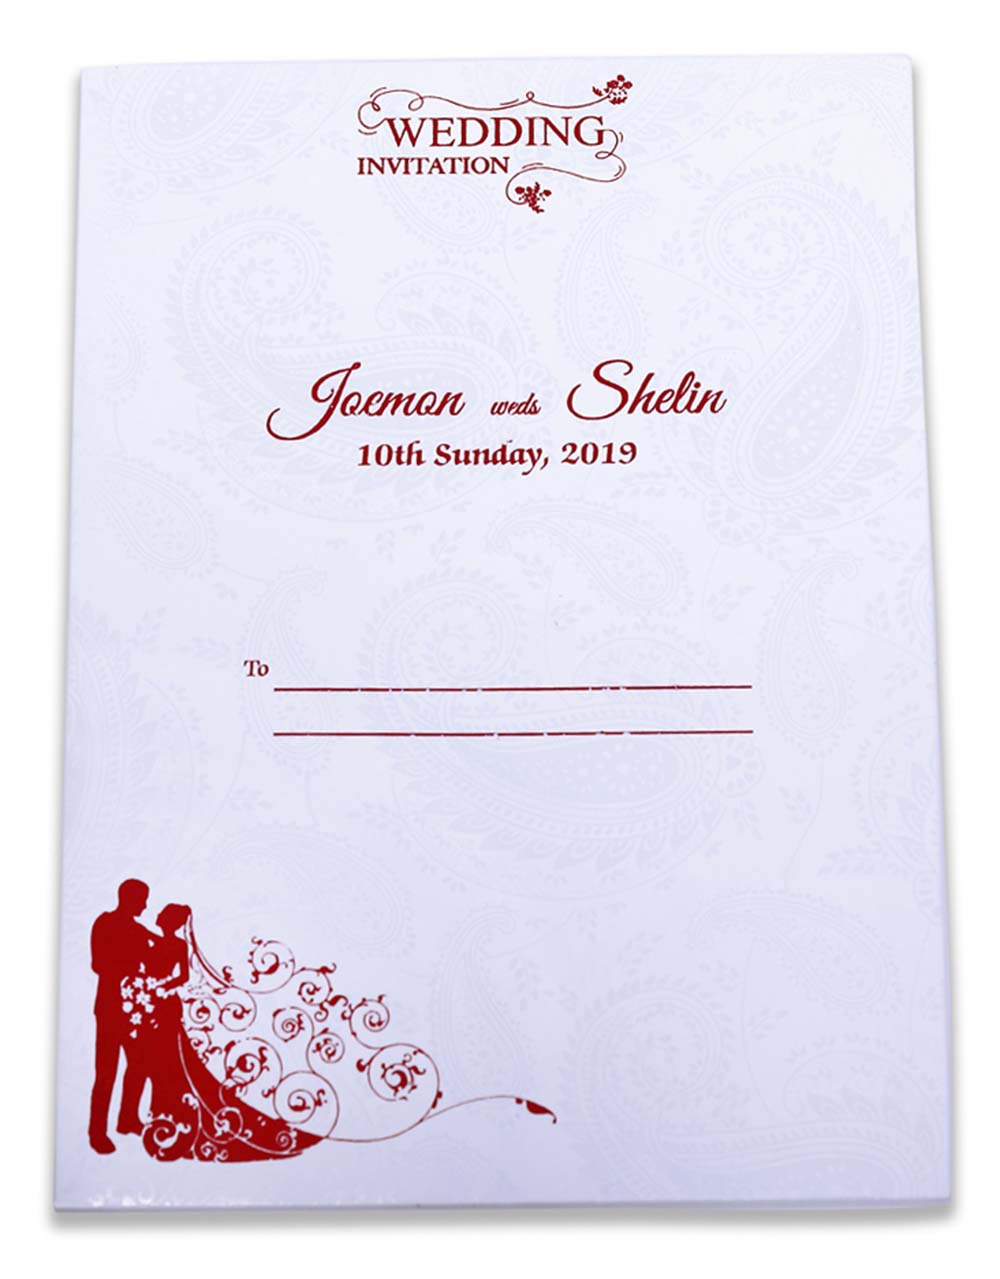 Indian wedding invitation in red satin with paisley design - Click Image to Close